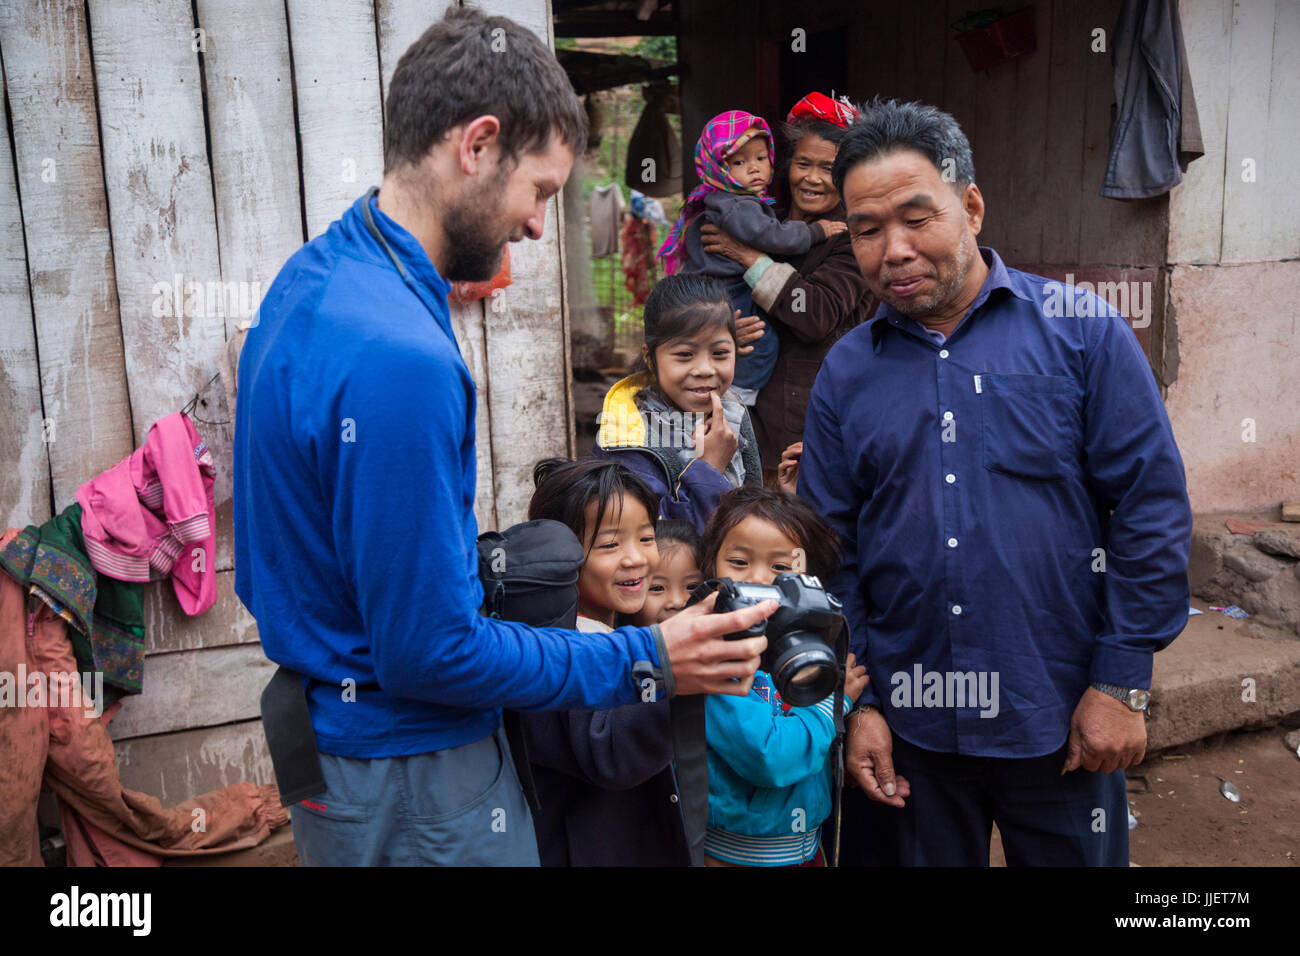 Robert Hahn shows a crowd of curious bystanders photos of themselves on the back of his camera in Muang Hat Hin, Laos. Stock Photo